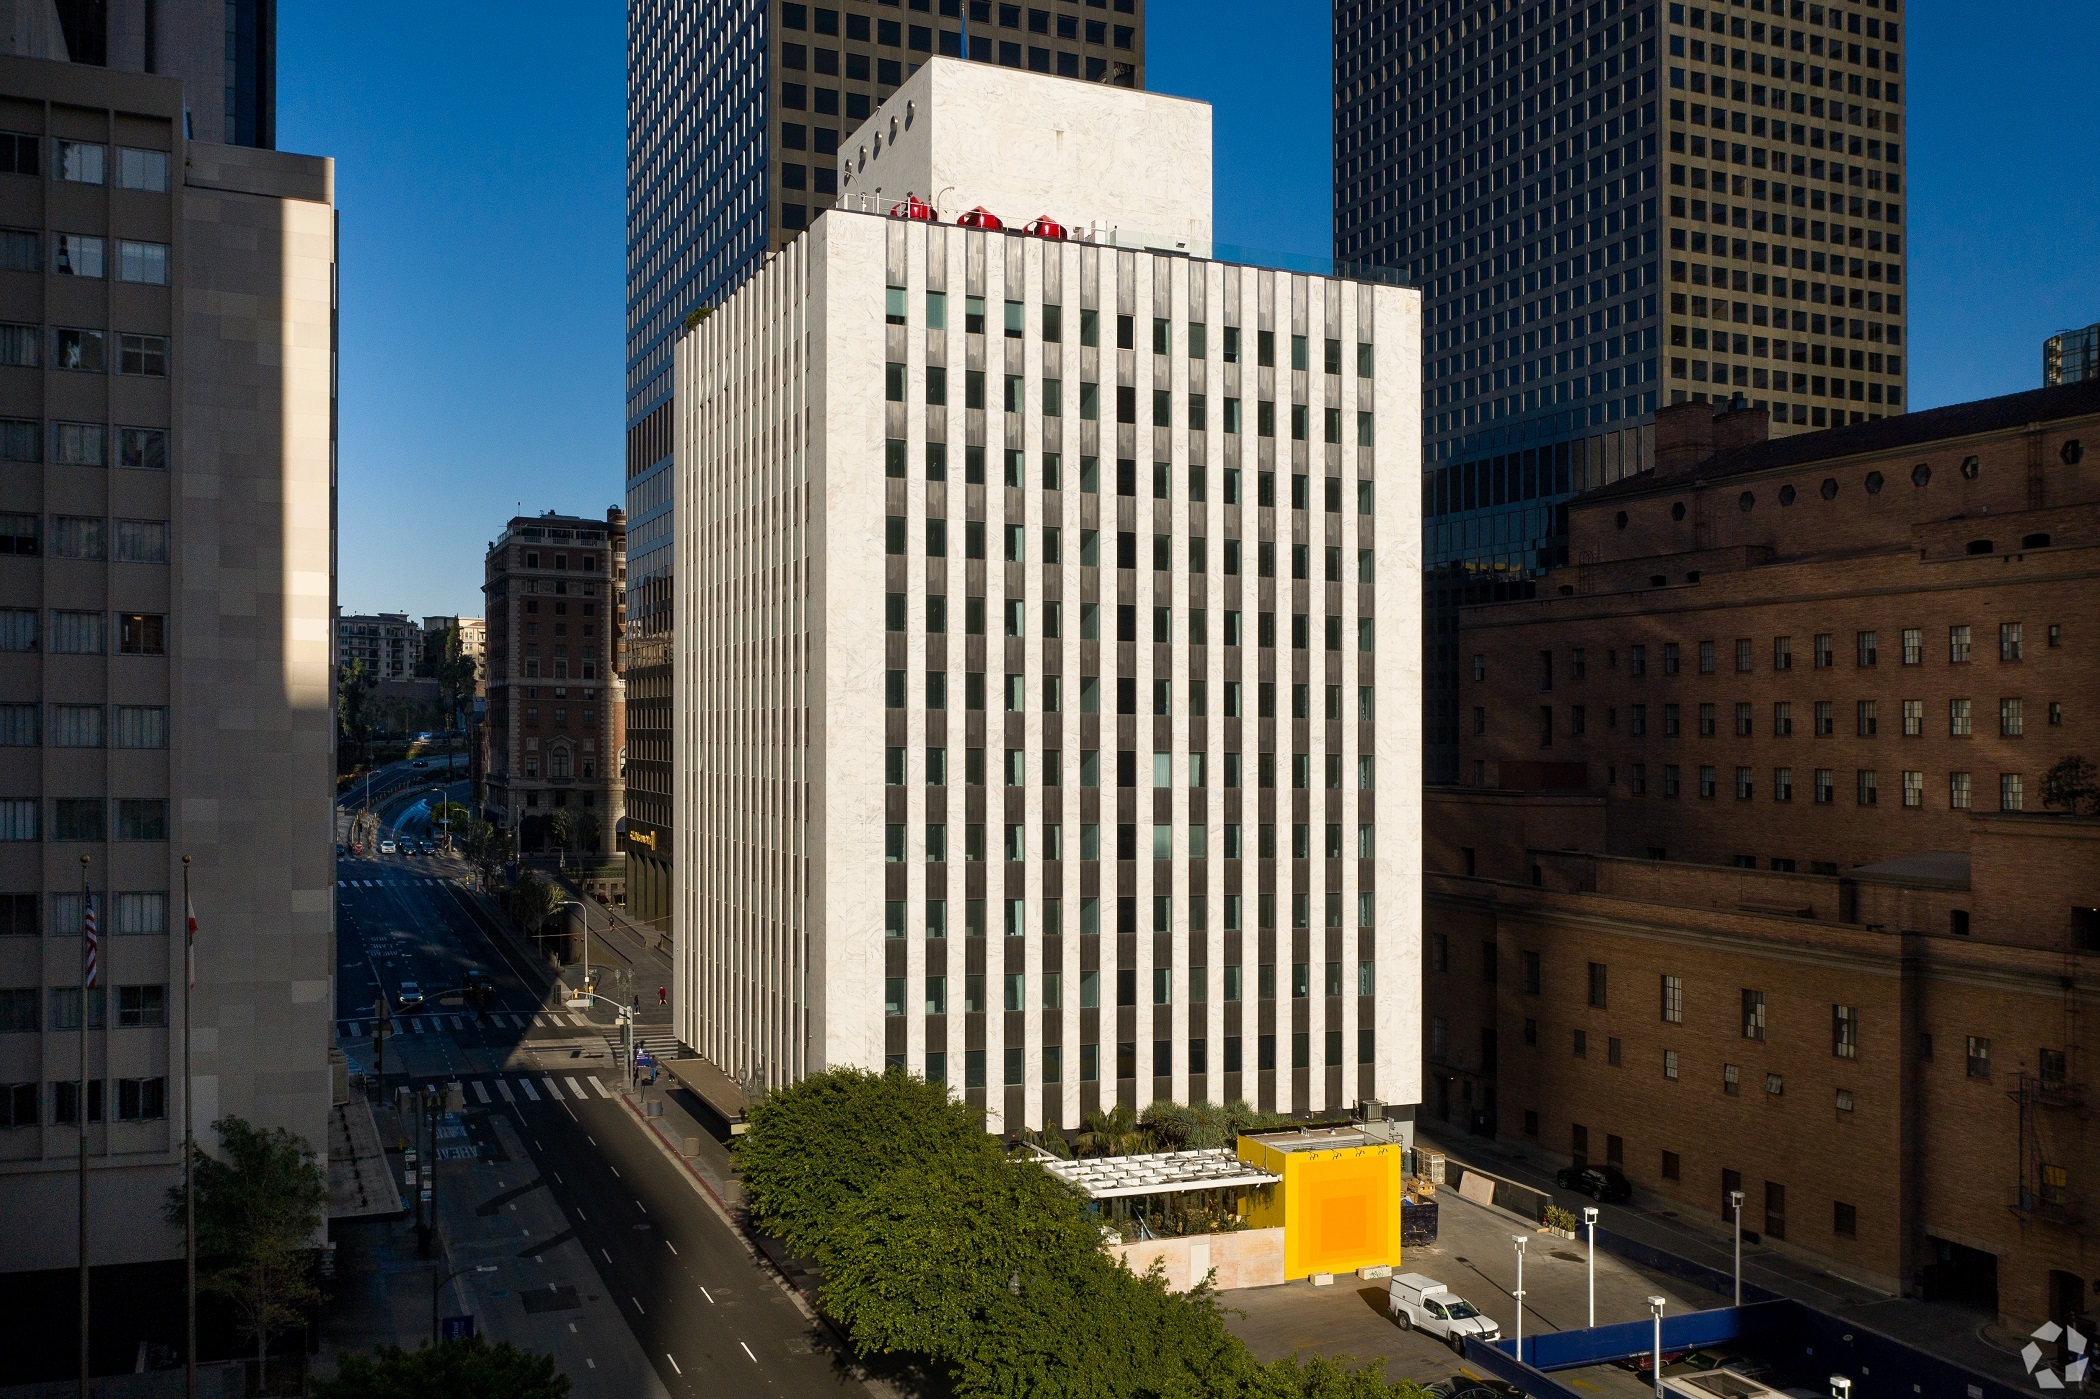 A hotel is expected to reopen in 550 S. Flower St. in downtown Los Angeles. The converted office building once housed The Standard hotel before it closed during the pandemic. (CoStar)